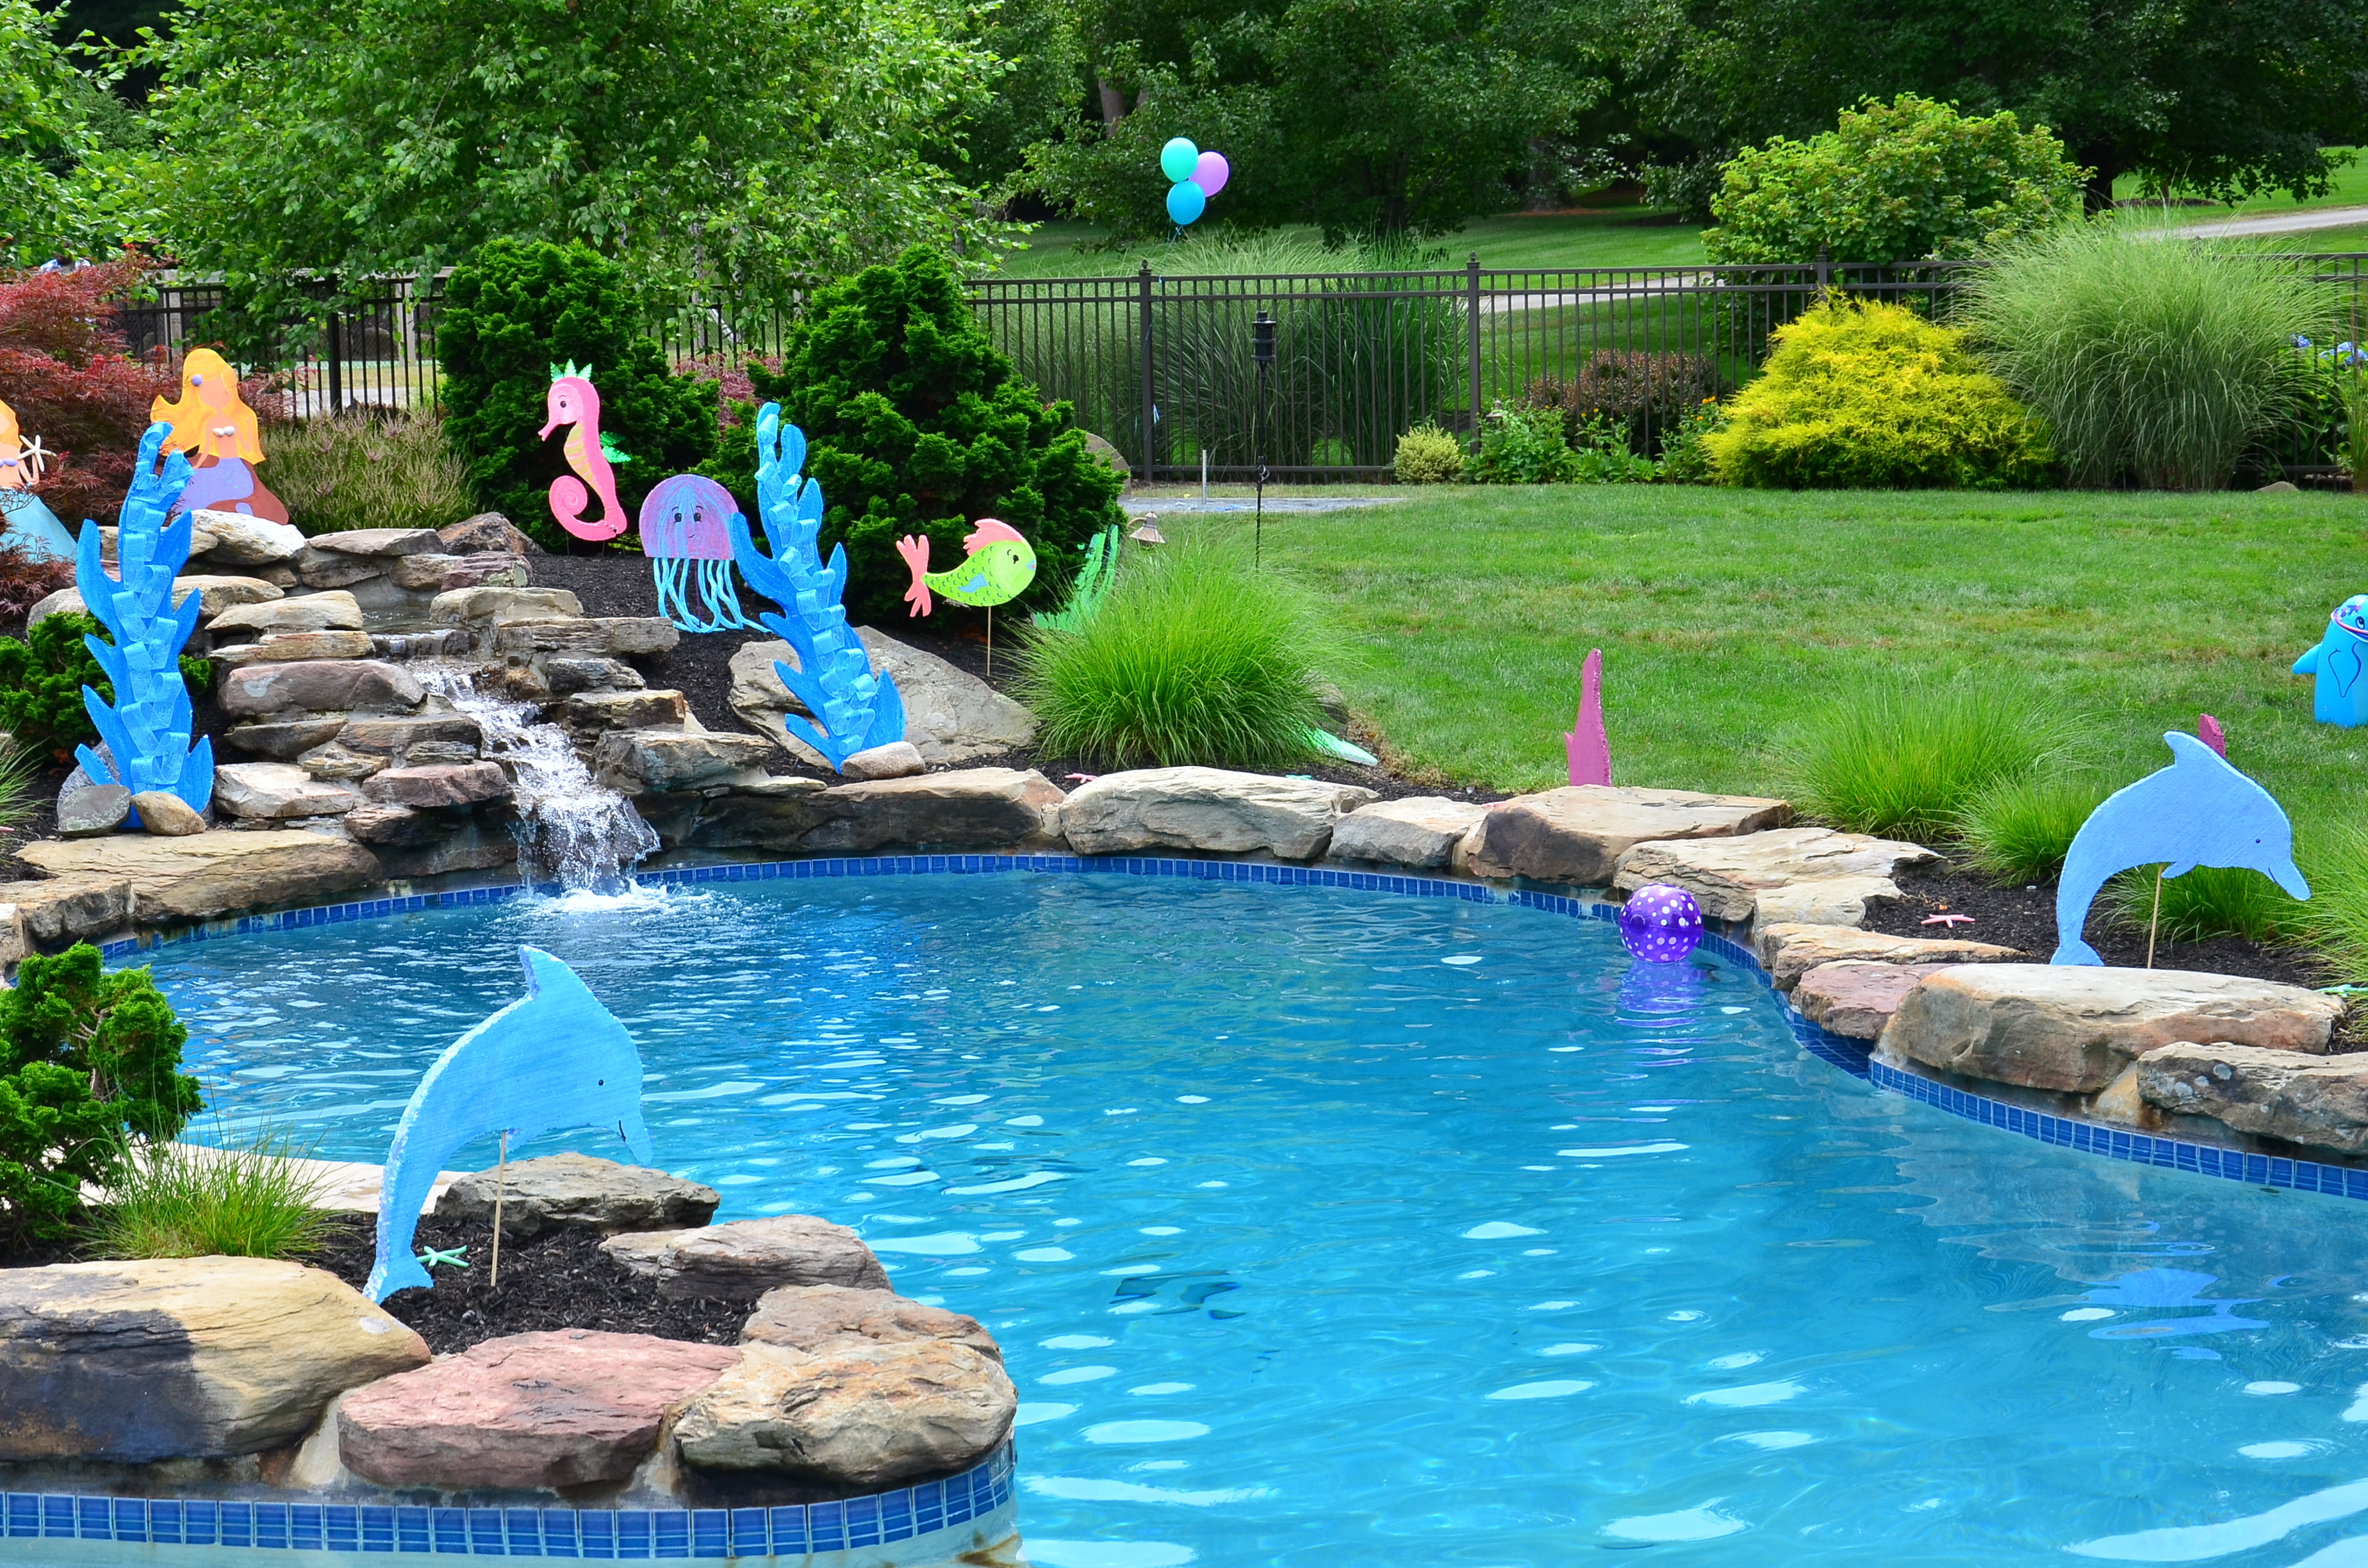 Water party, pool party, under the sea party, parties, theme parties, aqua, children, kids, sea creatures, birthday parties,